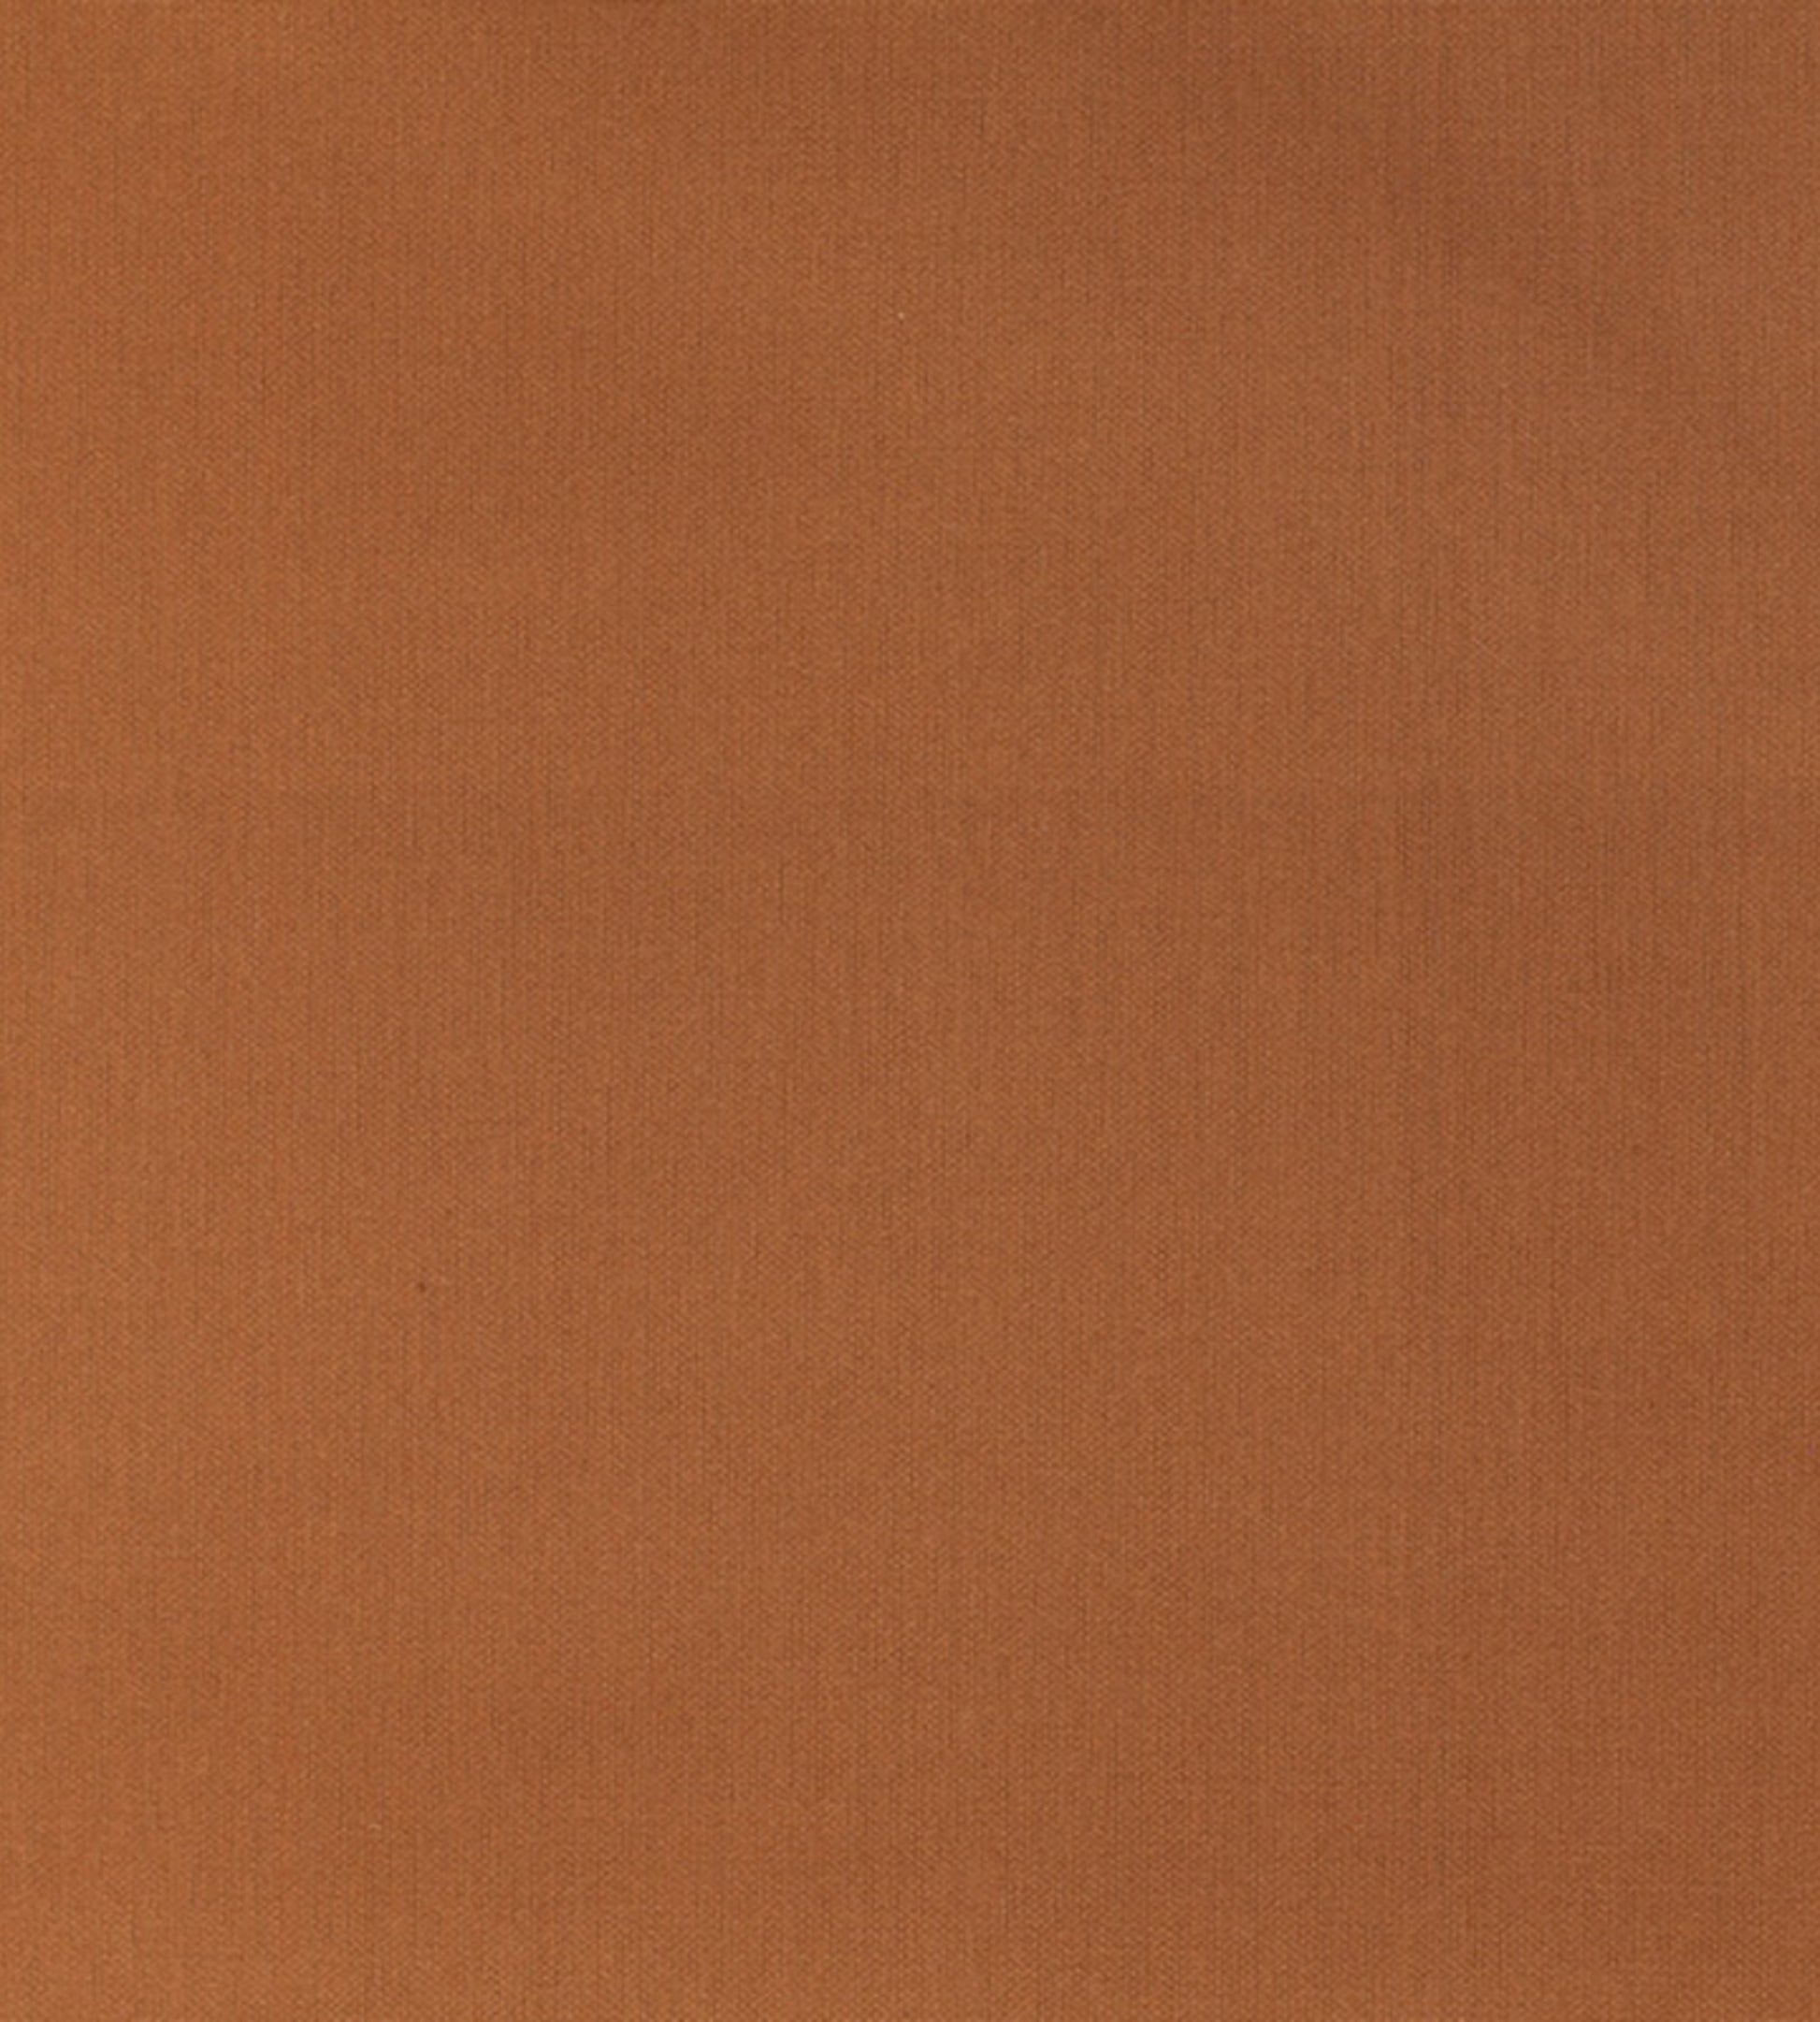 Purchase Old World Weavers Fabric Product VP 01251005, Pacific Silk Russet 1